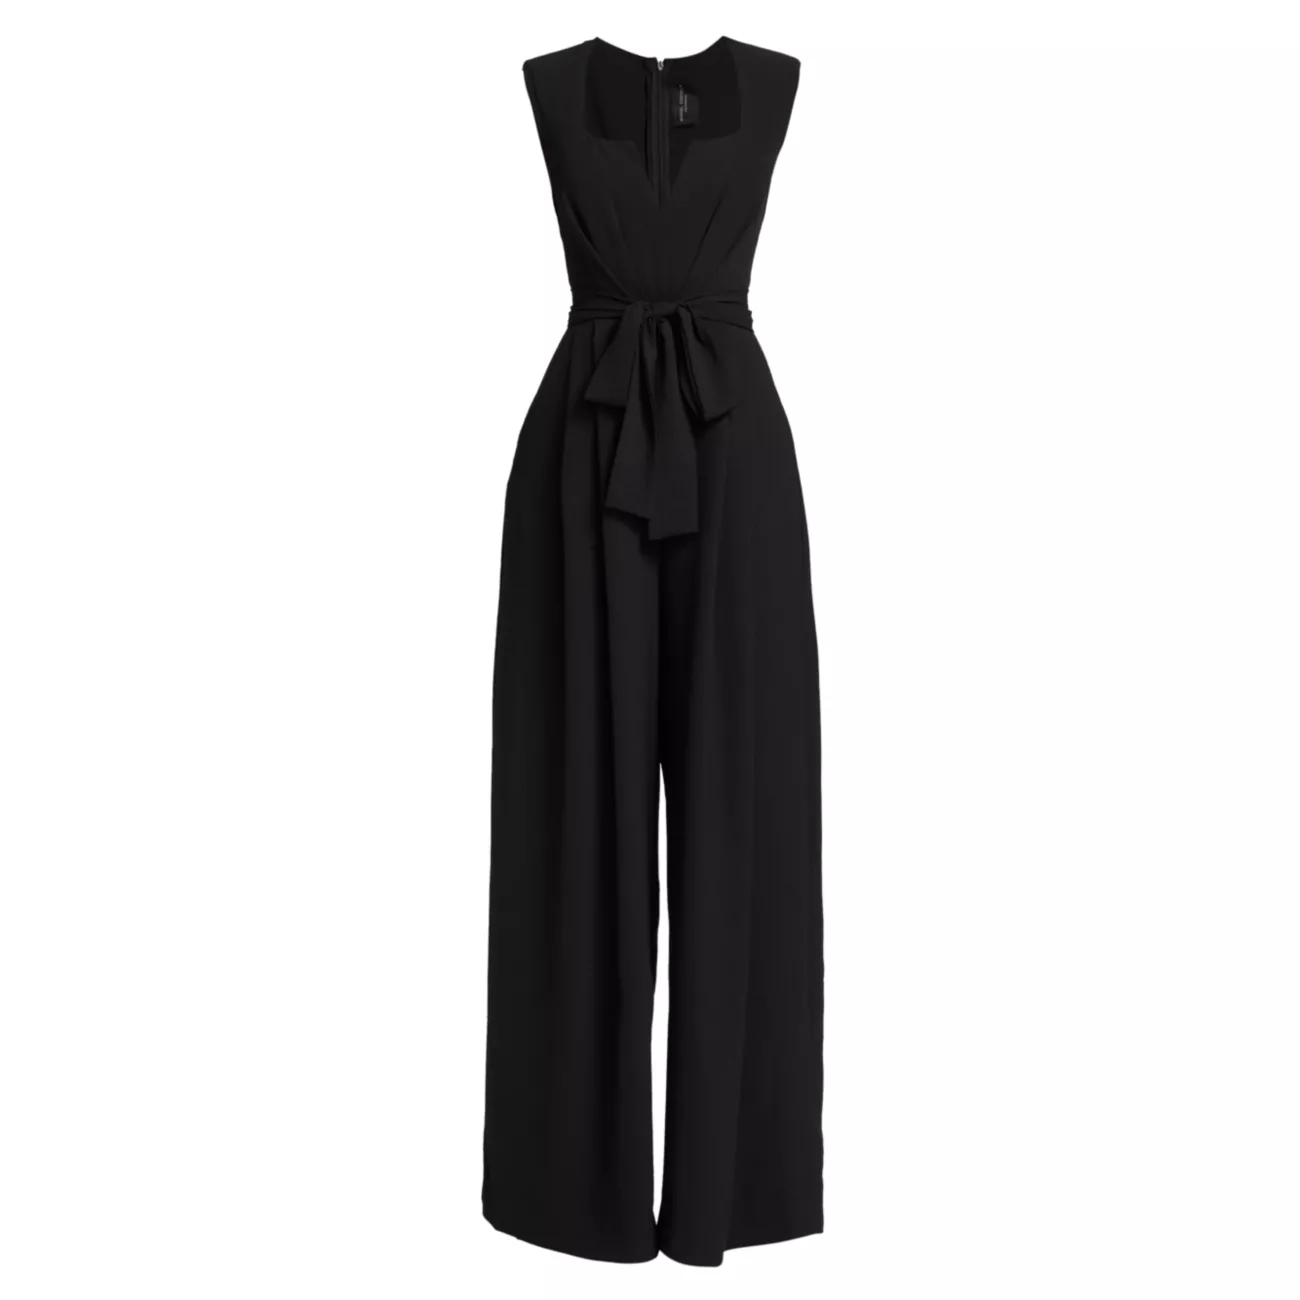 Eloise Belted Pleated Wide-Leg Jumpsuit MICHAEL COSTELLO COLLECTION